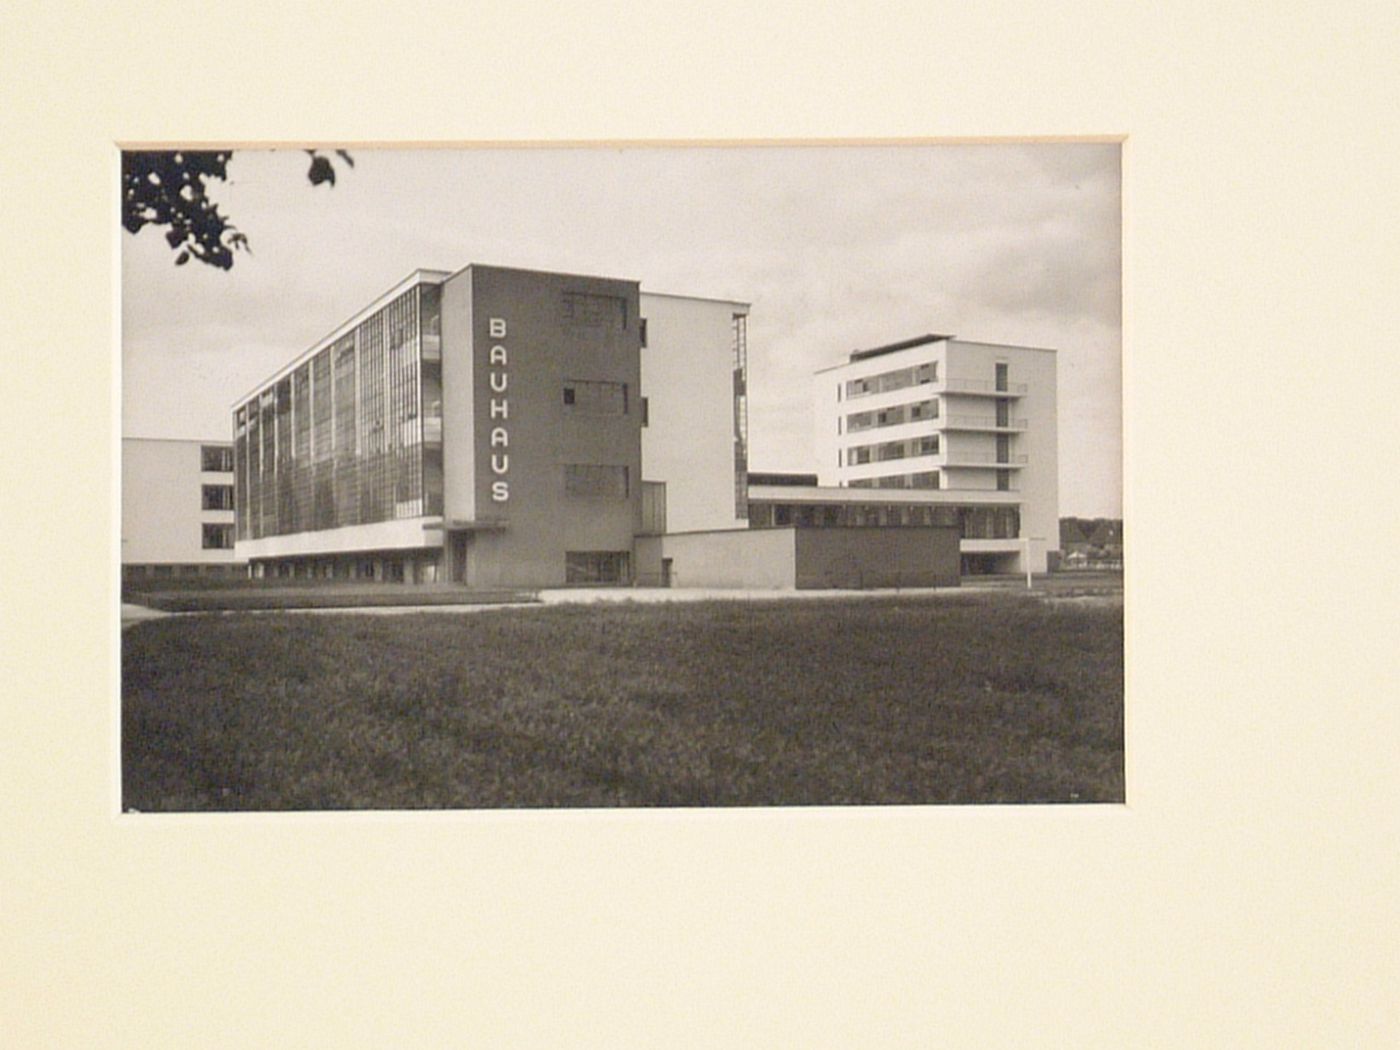 Exterior view of the Bauhaus building from the southeast, Dessau, Germany